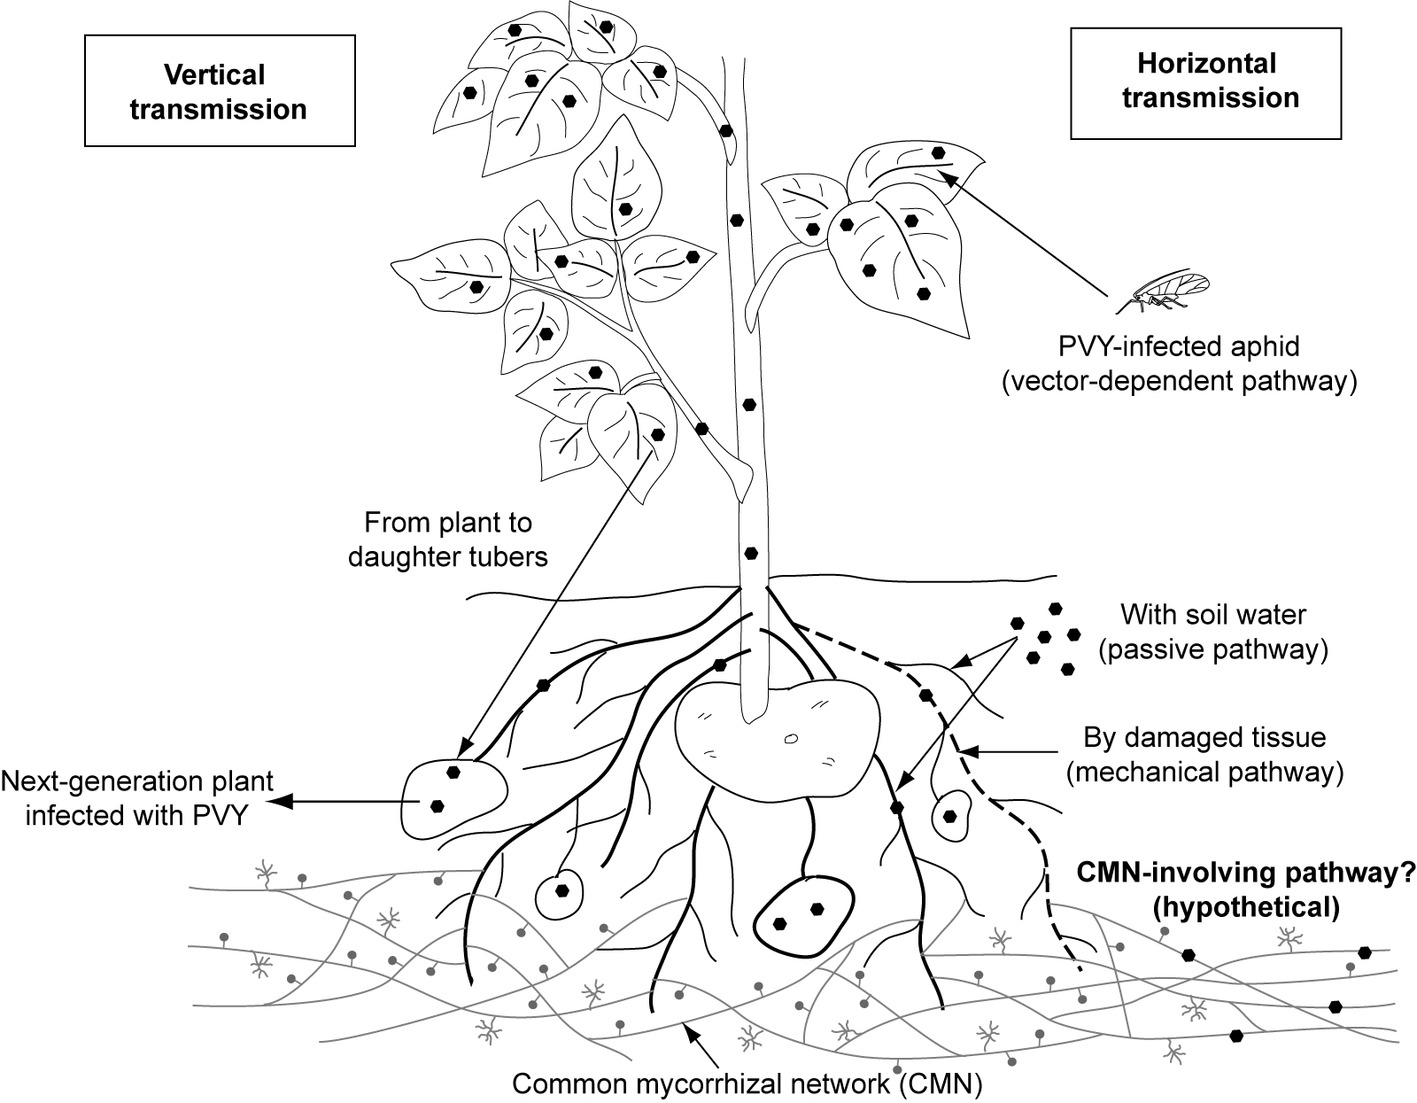 Frontiers | The Contribution of Endomycorrhiza to the Performance of